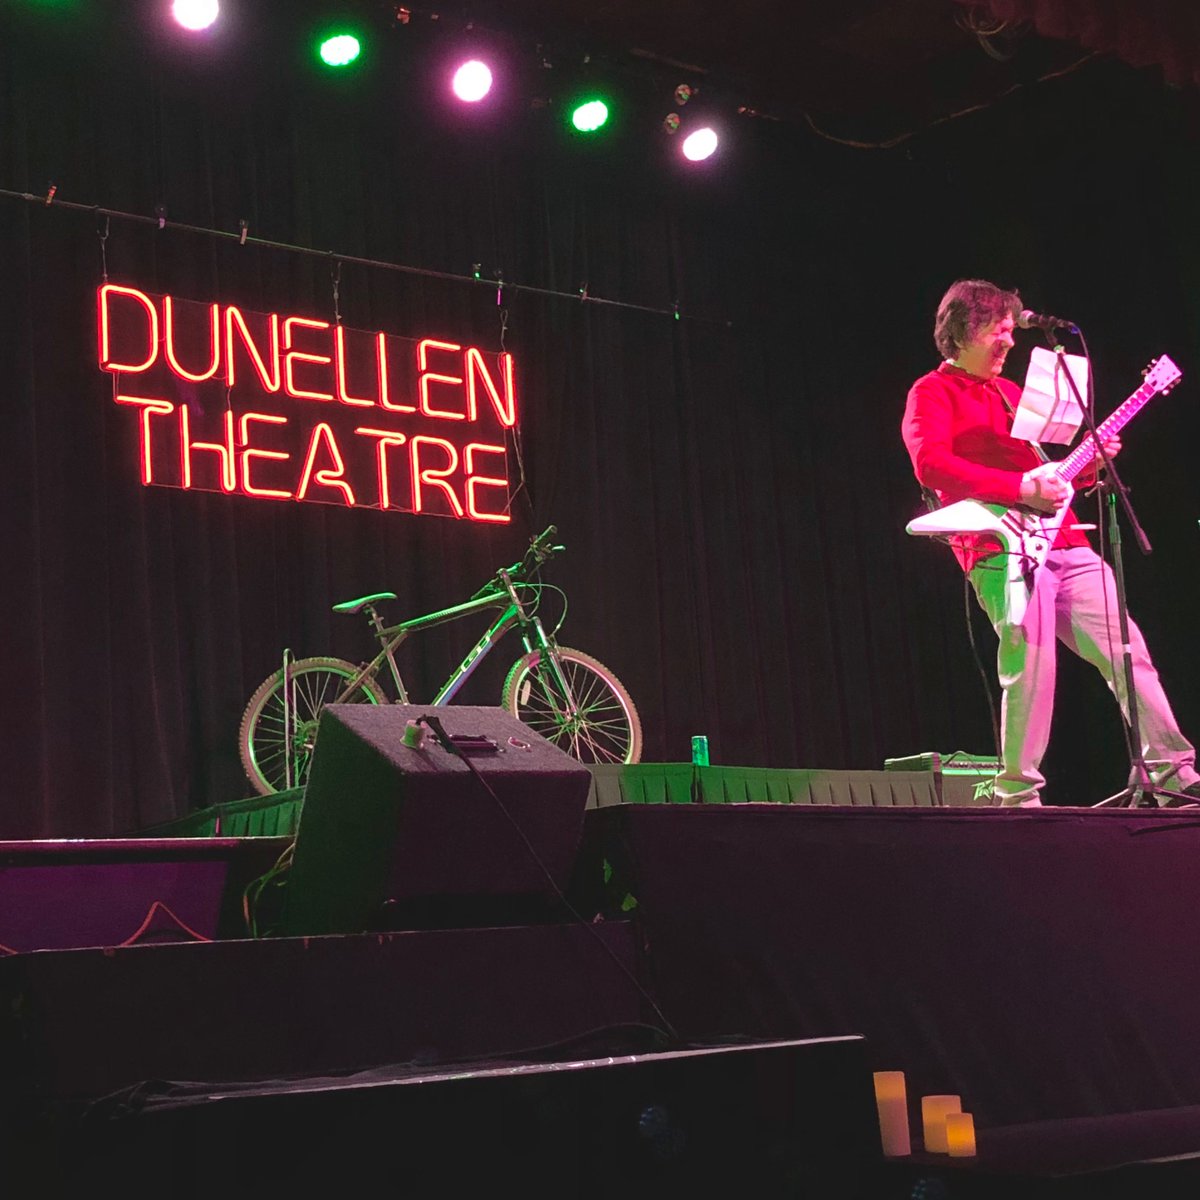 Just saw @mrdavehill melt faces at the Dunellen Theatre. So much porking going on.